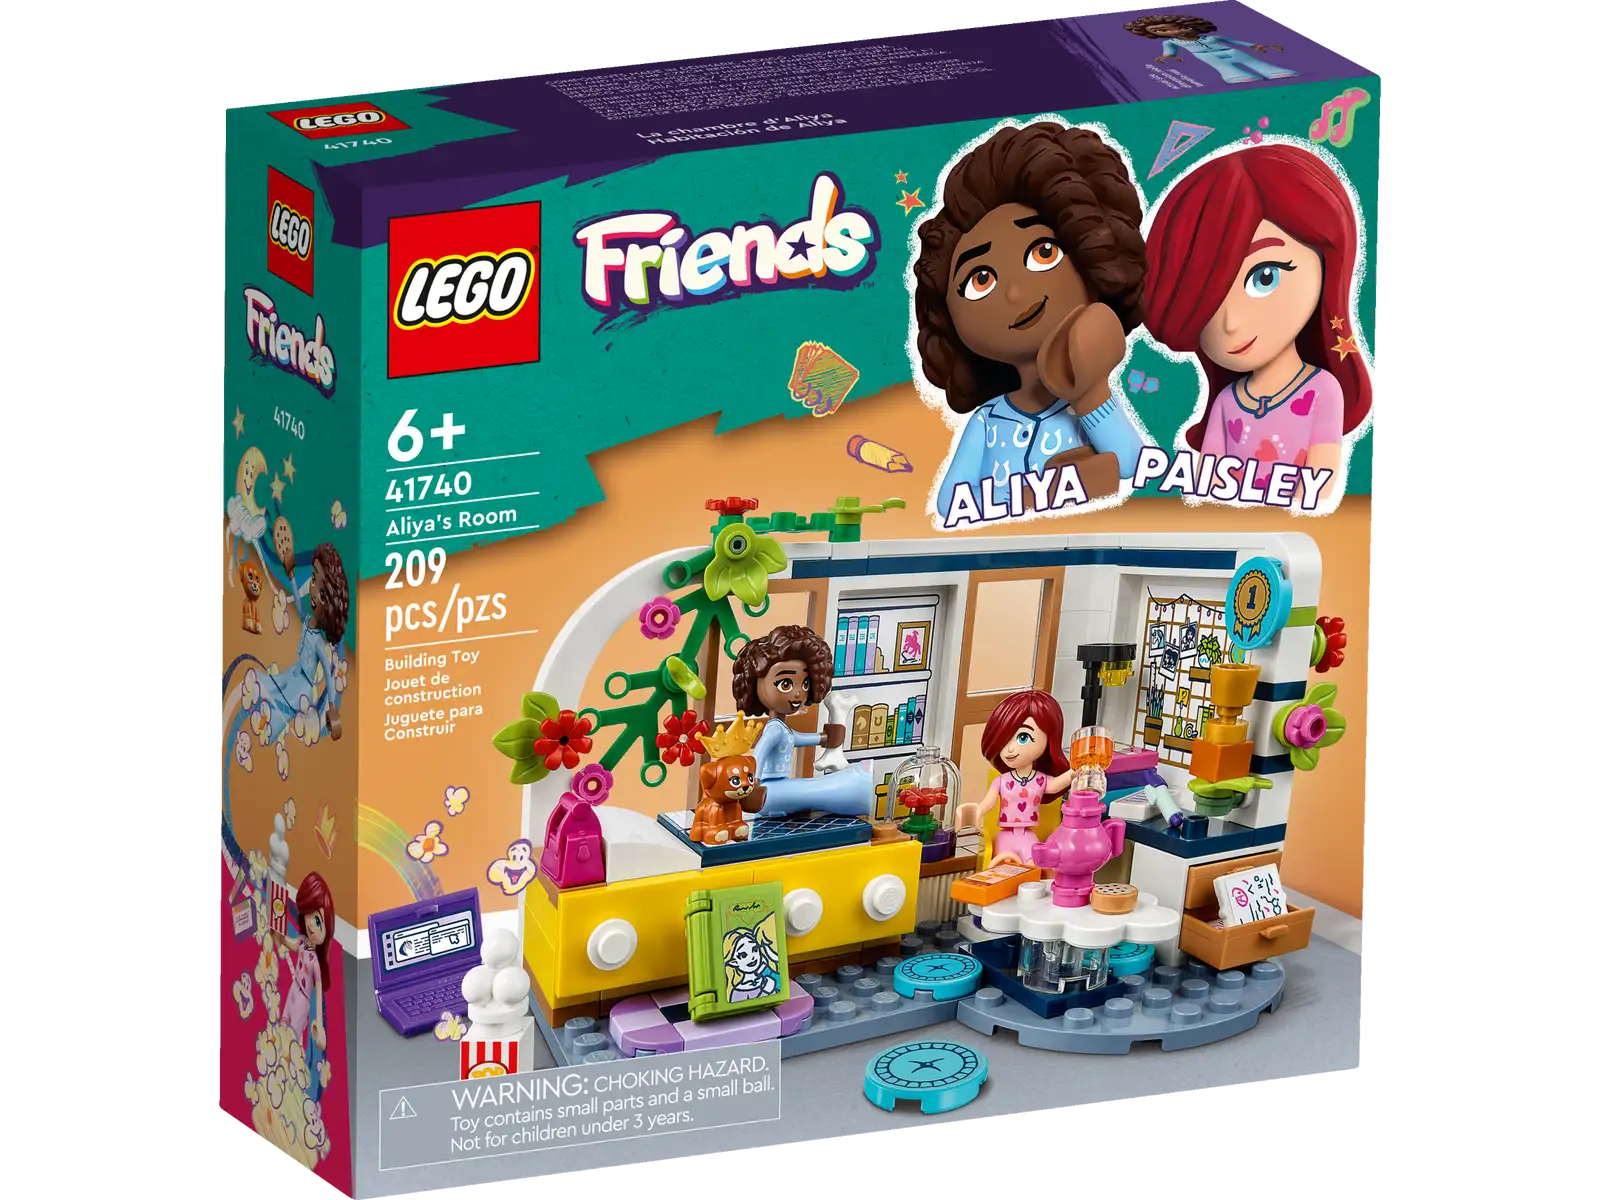 Kids aged 6+ can create their own fun stories with this LEGO® Friends Aliya's Room (41740) building set. There's lots to explore as Paisley and Aliya write stories together before their sleepover. The room reflects Aliya's studious nature with accessories including school papers, a swivel chair, laptop, book, lamp and a trophy. Kids will love the extra touches like the F-graded school paper that Aliya has hidden at the bottom of her stack of A grades! Perhaps Paisley can help her learn not to be so hard on herself. When it's time to relax, there's a big screen for movies and dog toy accessories for playtimes with Aliya's puppy. Instructions for young builders Kids can enjoy an easy and intuitive building adventure with the LEGO Builder app. Here they can zoom in and rotate models in 3D, save sets and track their progress. A new generation of Heartlake City Kids can make friends, discover exciting locations and act out real-life adventures in the LEGO Friends universe. Bedroom playset for creative fun – Kids aged 6+ can create their own fun stories with this LEGO® Friends Aliya's Room (41740) building toy set Includes 2 mini-dolls – The toy set comes with LEGO® Friends mini-dolls Aliya and Paisley plus an Aira the dog character Feed their imagination – This set is made for play and kids can invent endless sleepover stories inspired by hardworking Aliya and her friendship with shy Paisley Lots of accessories – The set includes a swivel chair, desk, movie screen, 2 beds and lots of accessories including school papers, dog toys, a laptop, book, phone, lamp and a trophy A gift idea for kids – This LEGO® Friends toy set makes a fun gift to delight kids who love to create their own stories Made for play – This toy measures over 3 in. (8 cm) high, 5 in. (13 cm) wide and 3.5 in. (10 cm) deep A helping hand – Discover intuitive building instructions in the LEGO® Builder app where you can zoom in and rotate models in 3D, track progress andsave sets as your child develops new skills A new generation of Heartlake City – In January 2023, the LEGO® Friends universe expanded to introduce new characters and new locations to inspire more role-play adventures Designed for quality – All LEGO® components meet strict industry standards to ensure they are consistent, compatible and easy to build with A safe choice – LEGO® Friends bricks and pieces are dropped, heated, crushed, twisted and analyzed to make sure they meet stringent global safety standards